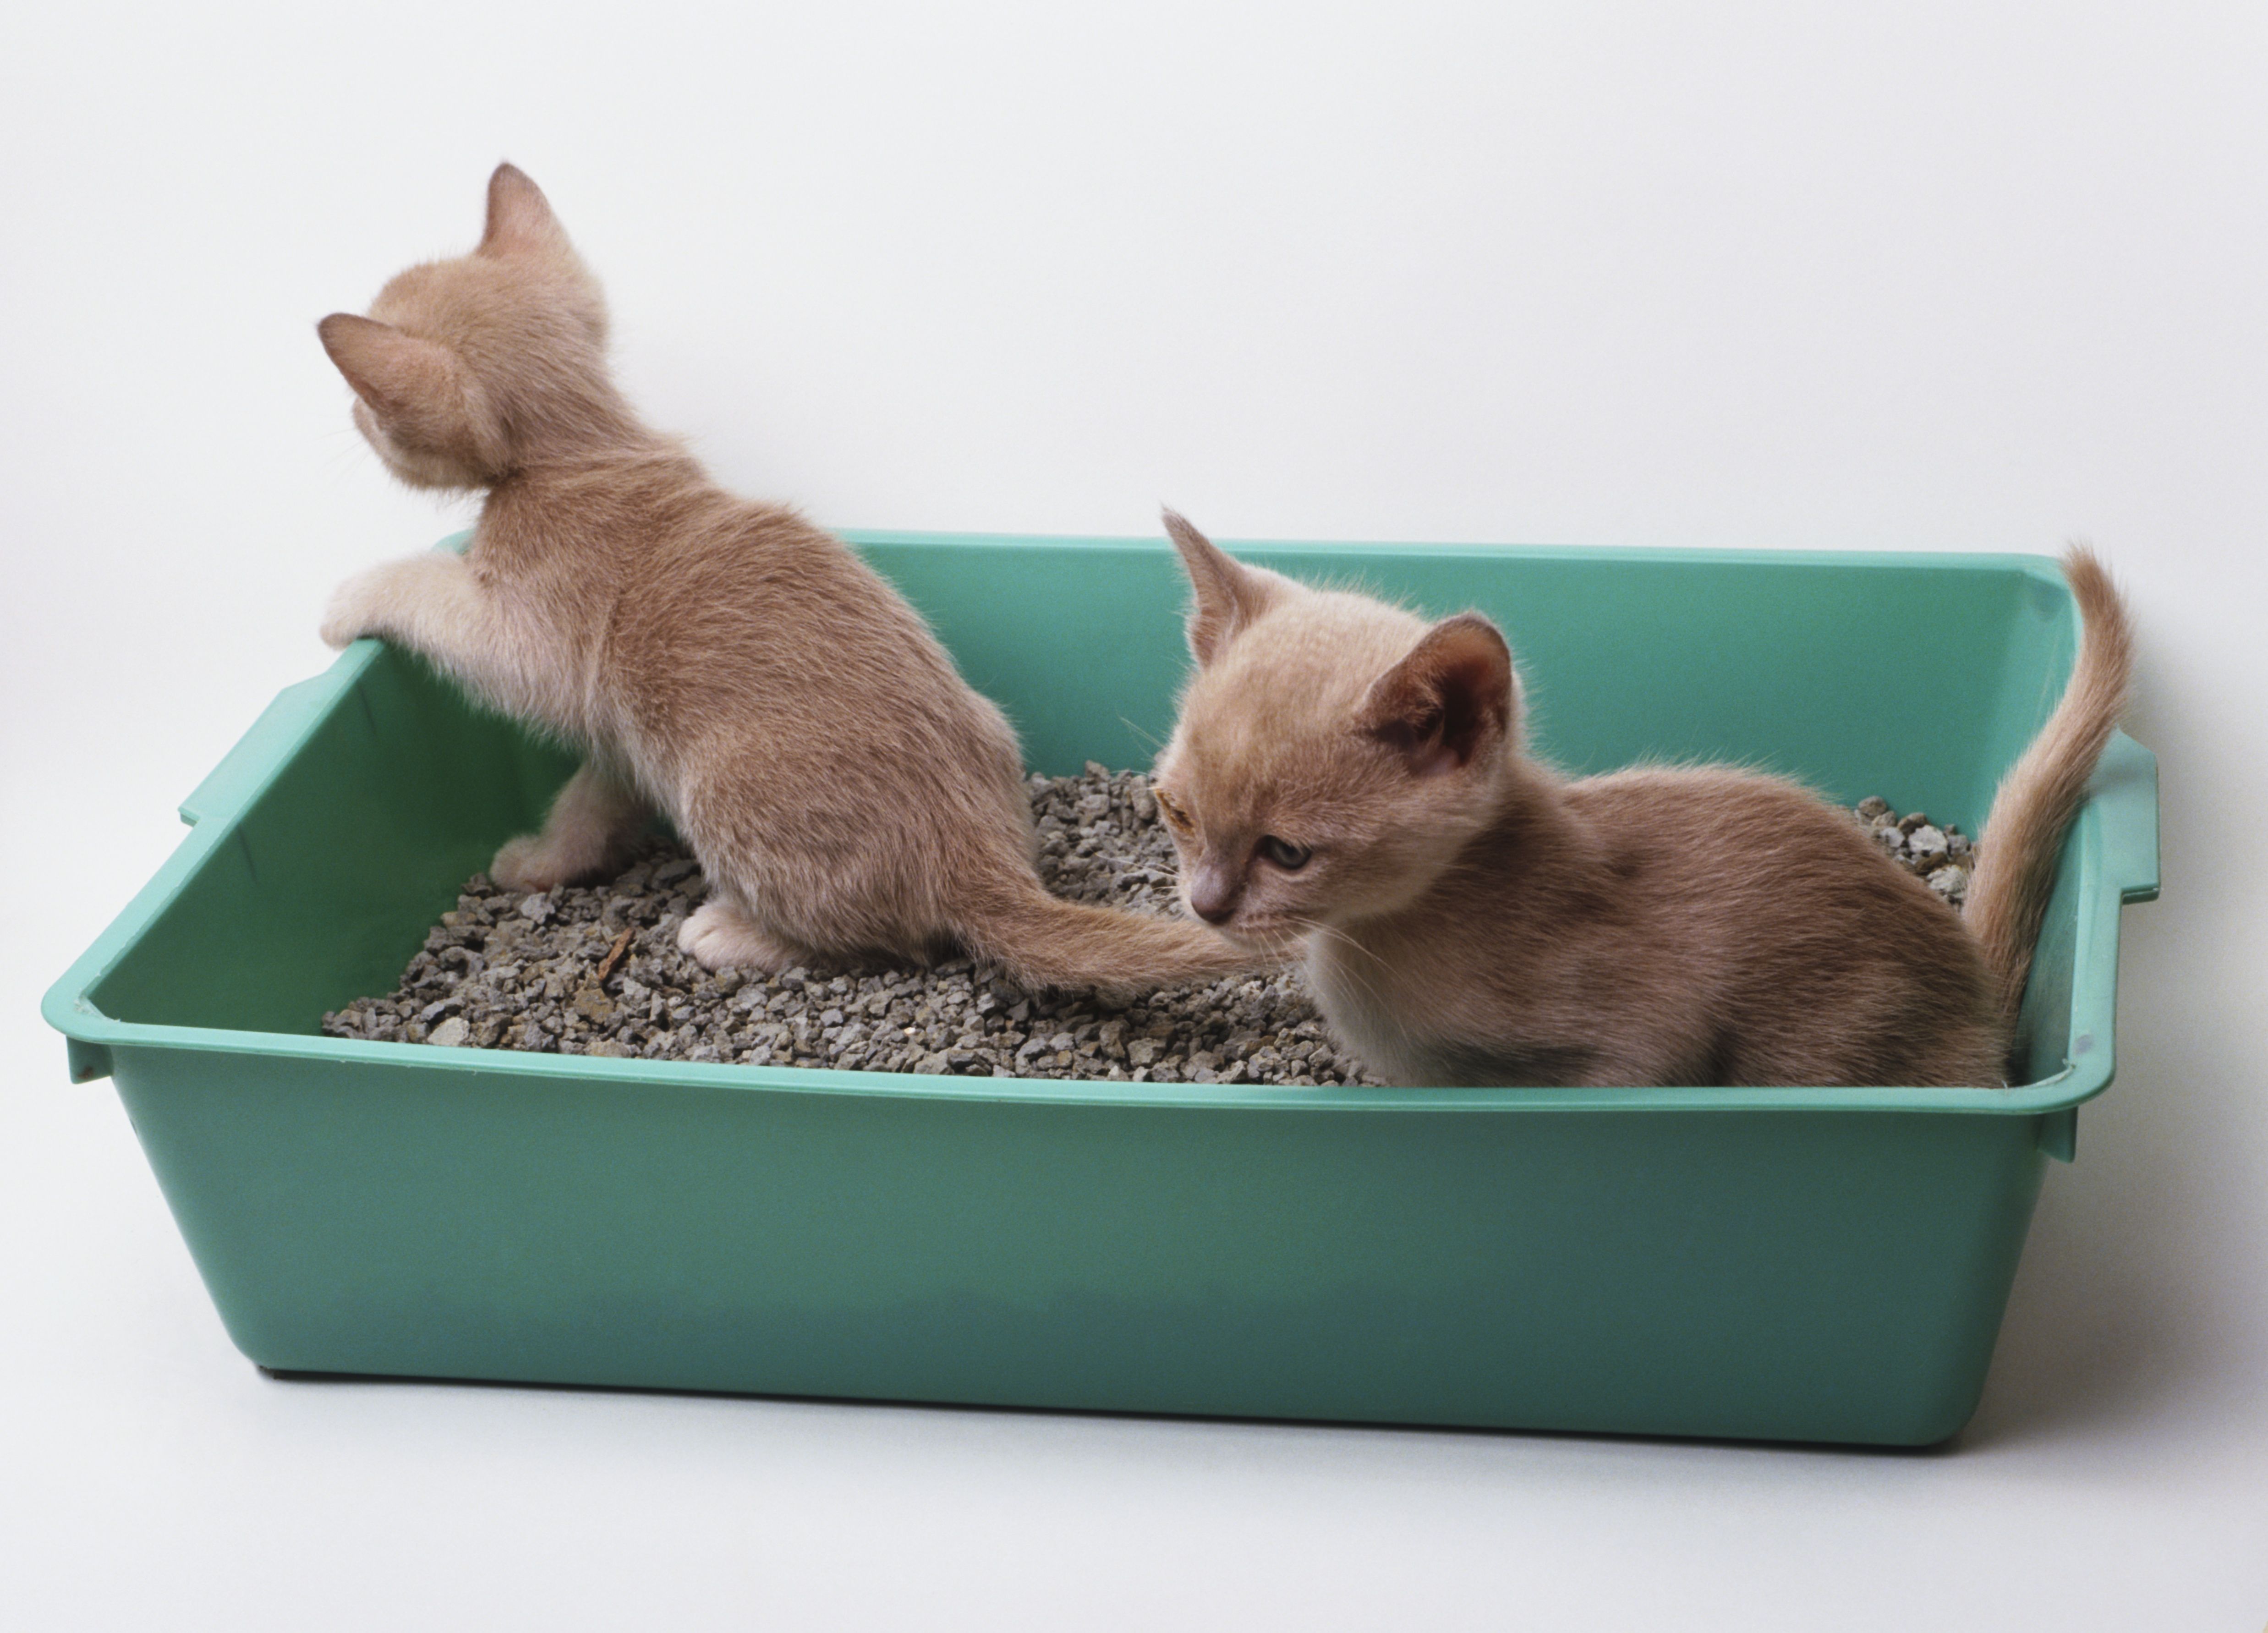 Two greyish-brown kittens (Felis silvestris catus) in green plastic litter tray, paw of one kitten resting on edge of tray.